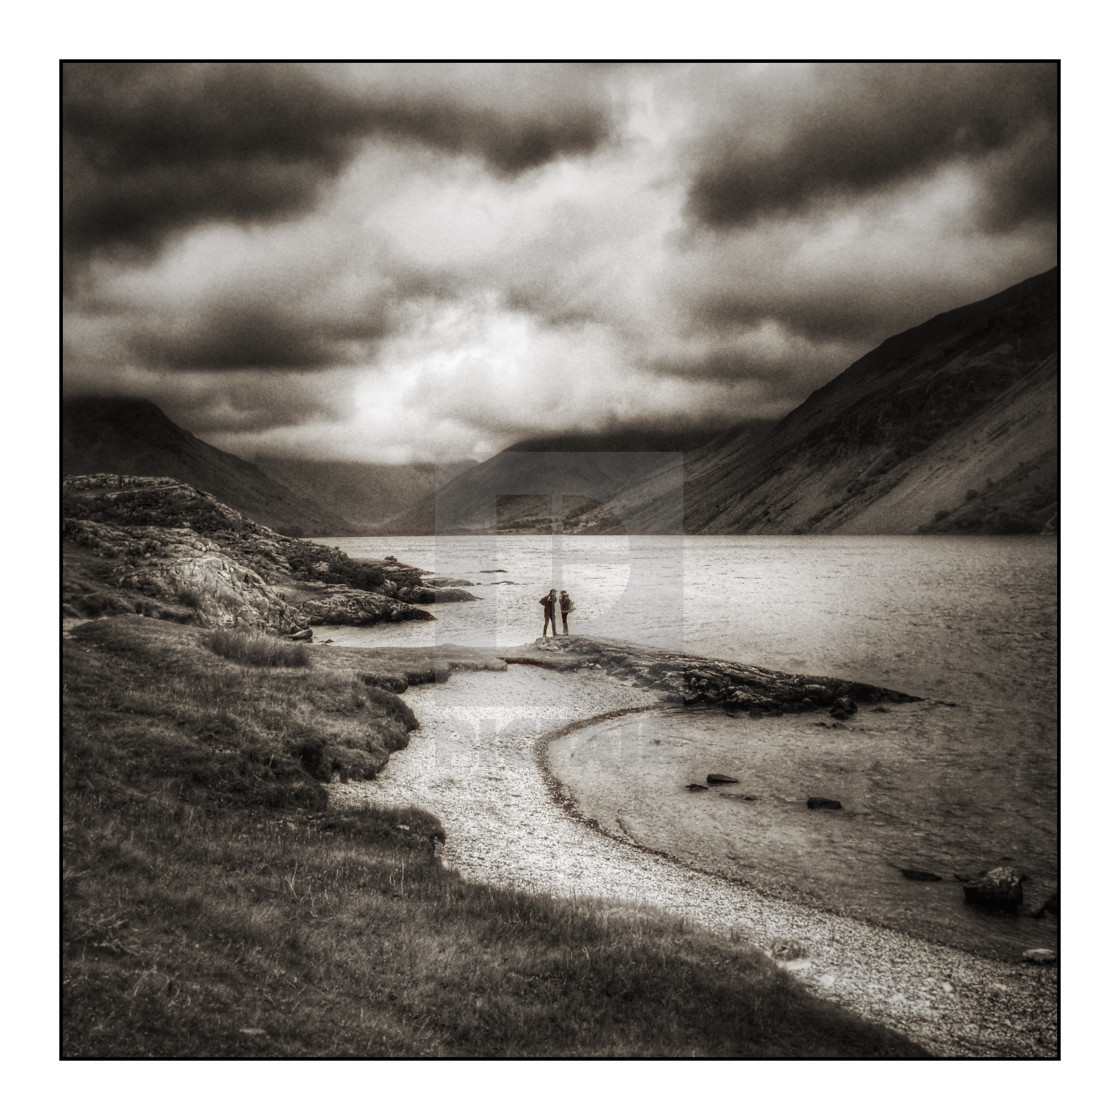 "People at Wastwater lake with storm clouds, mono toned" stock image